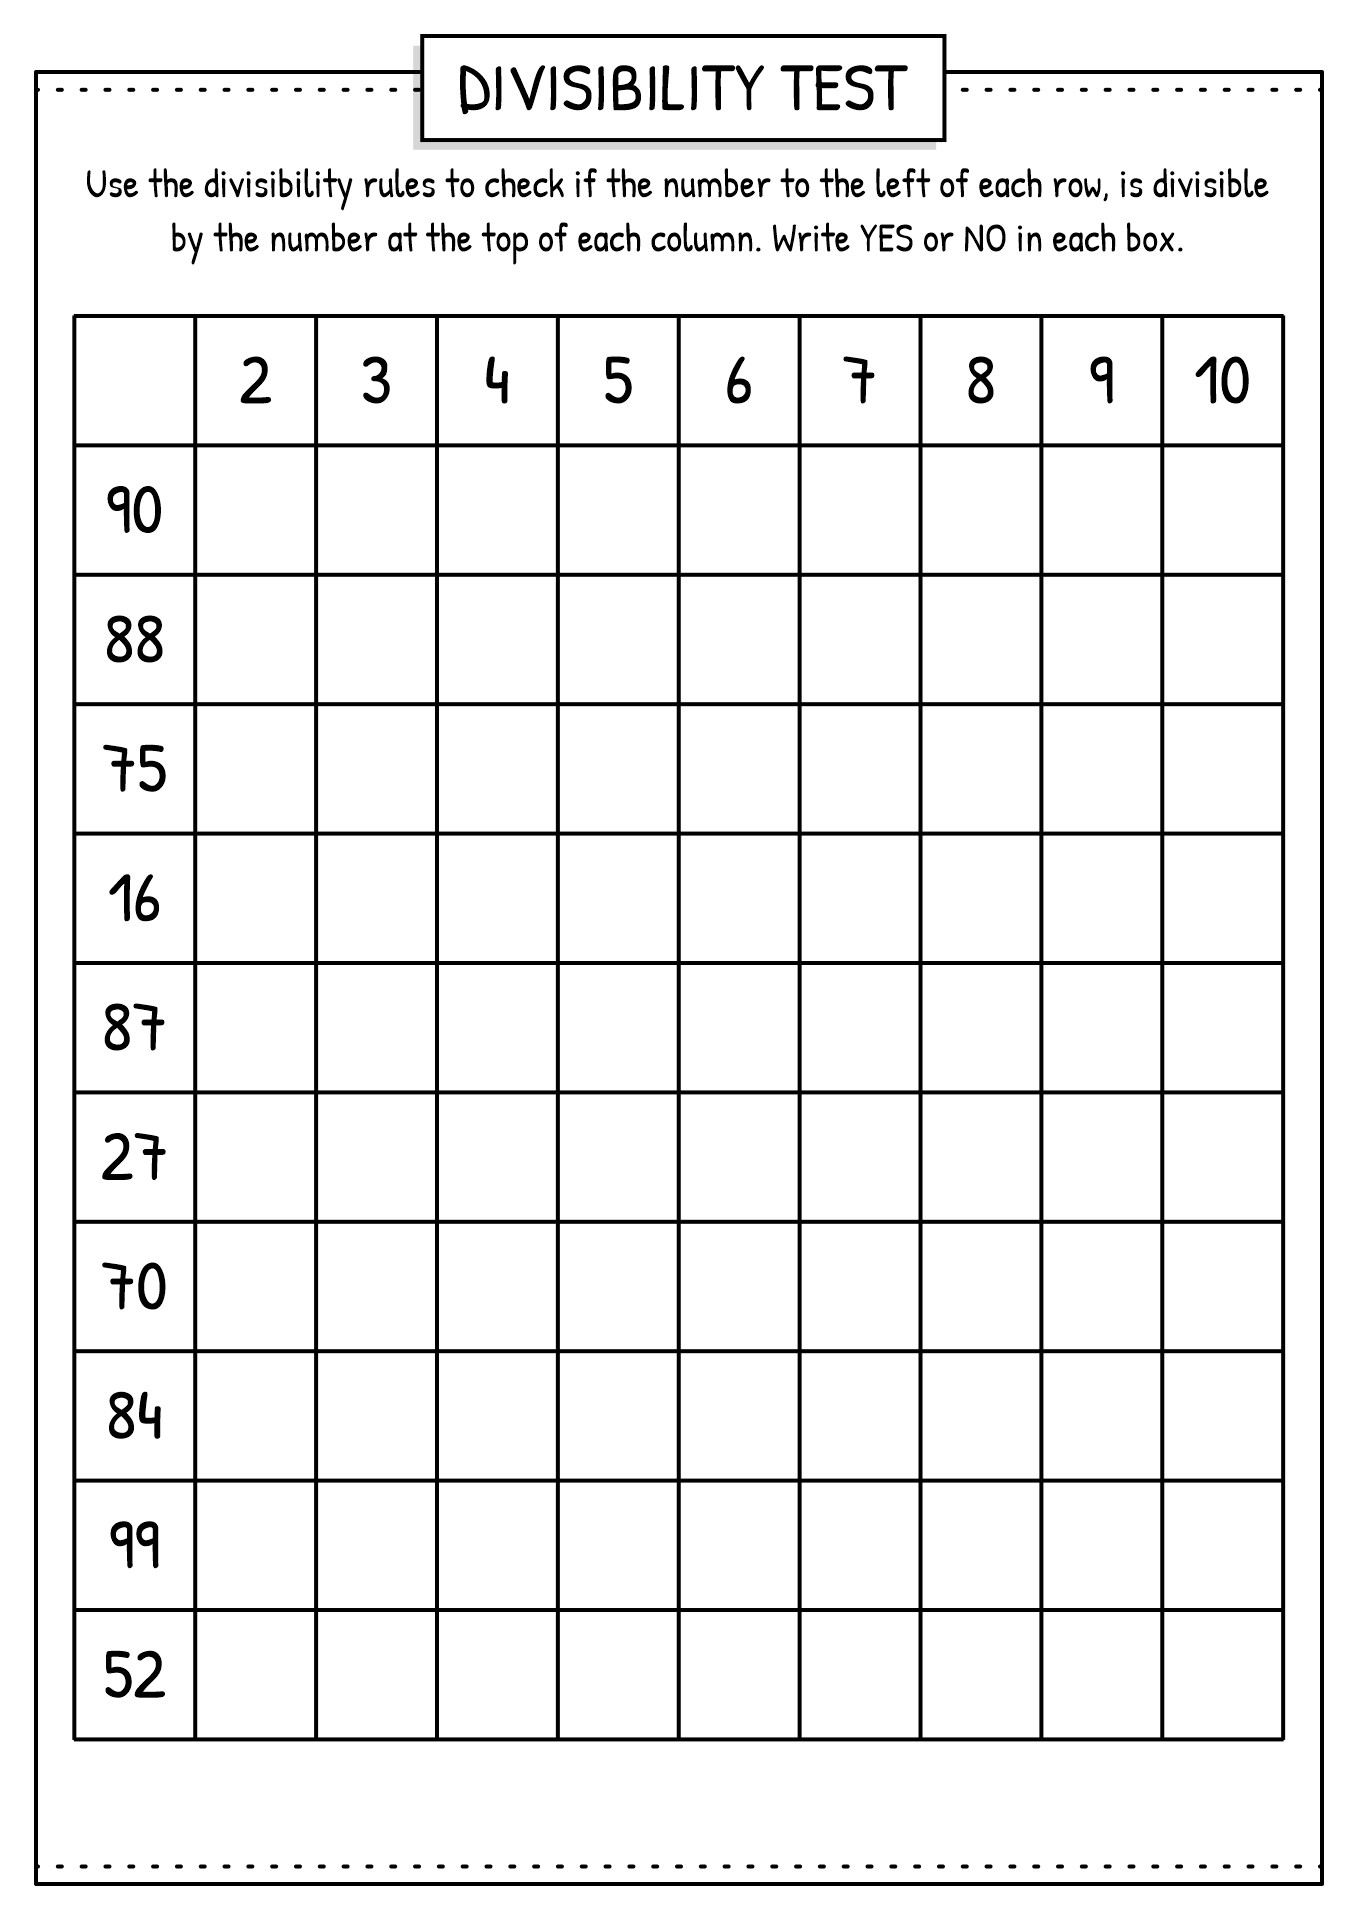 Divisibility Rules Worksheet